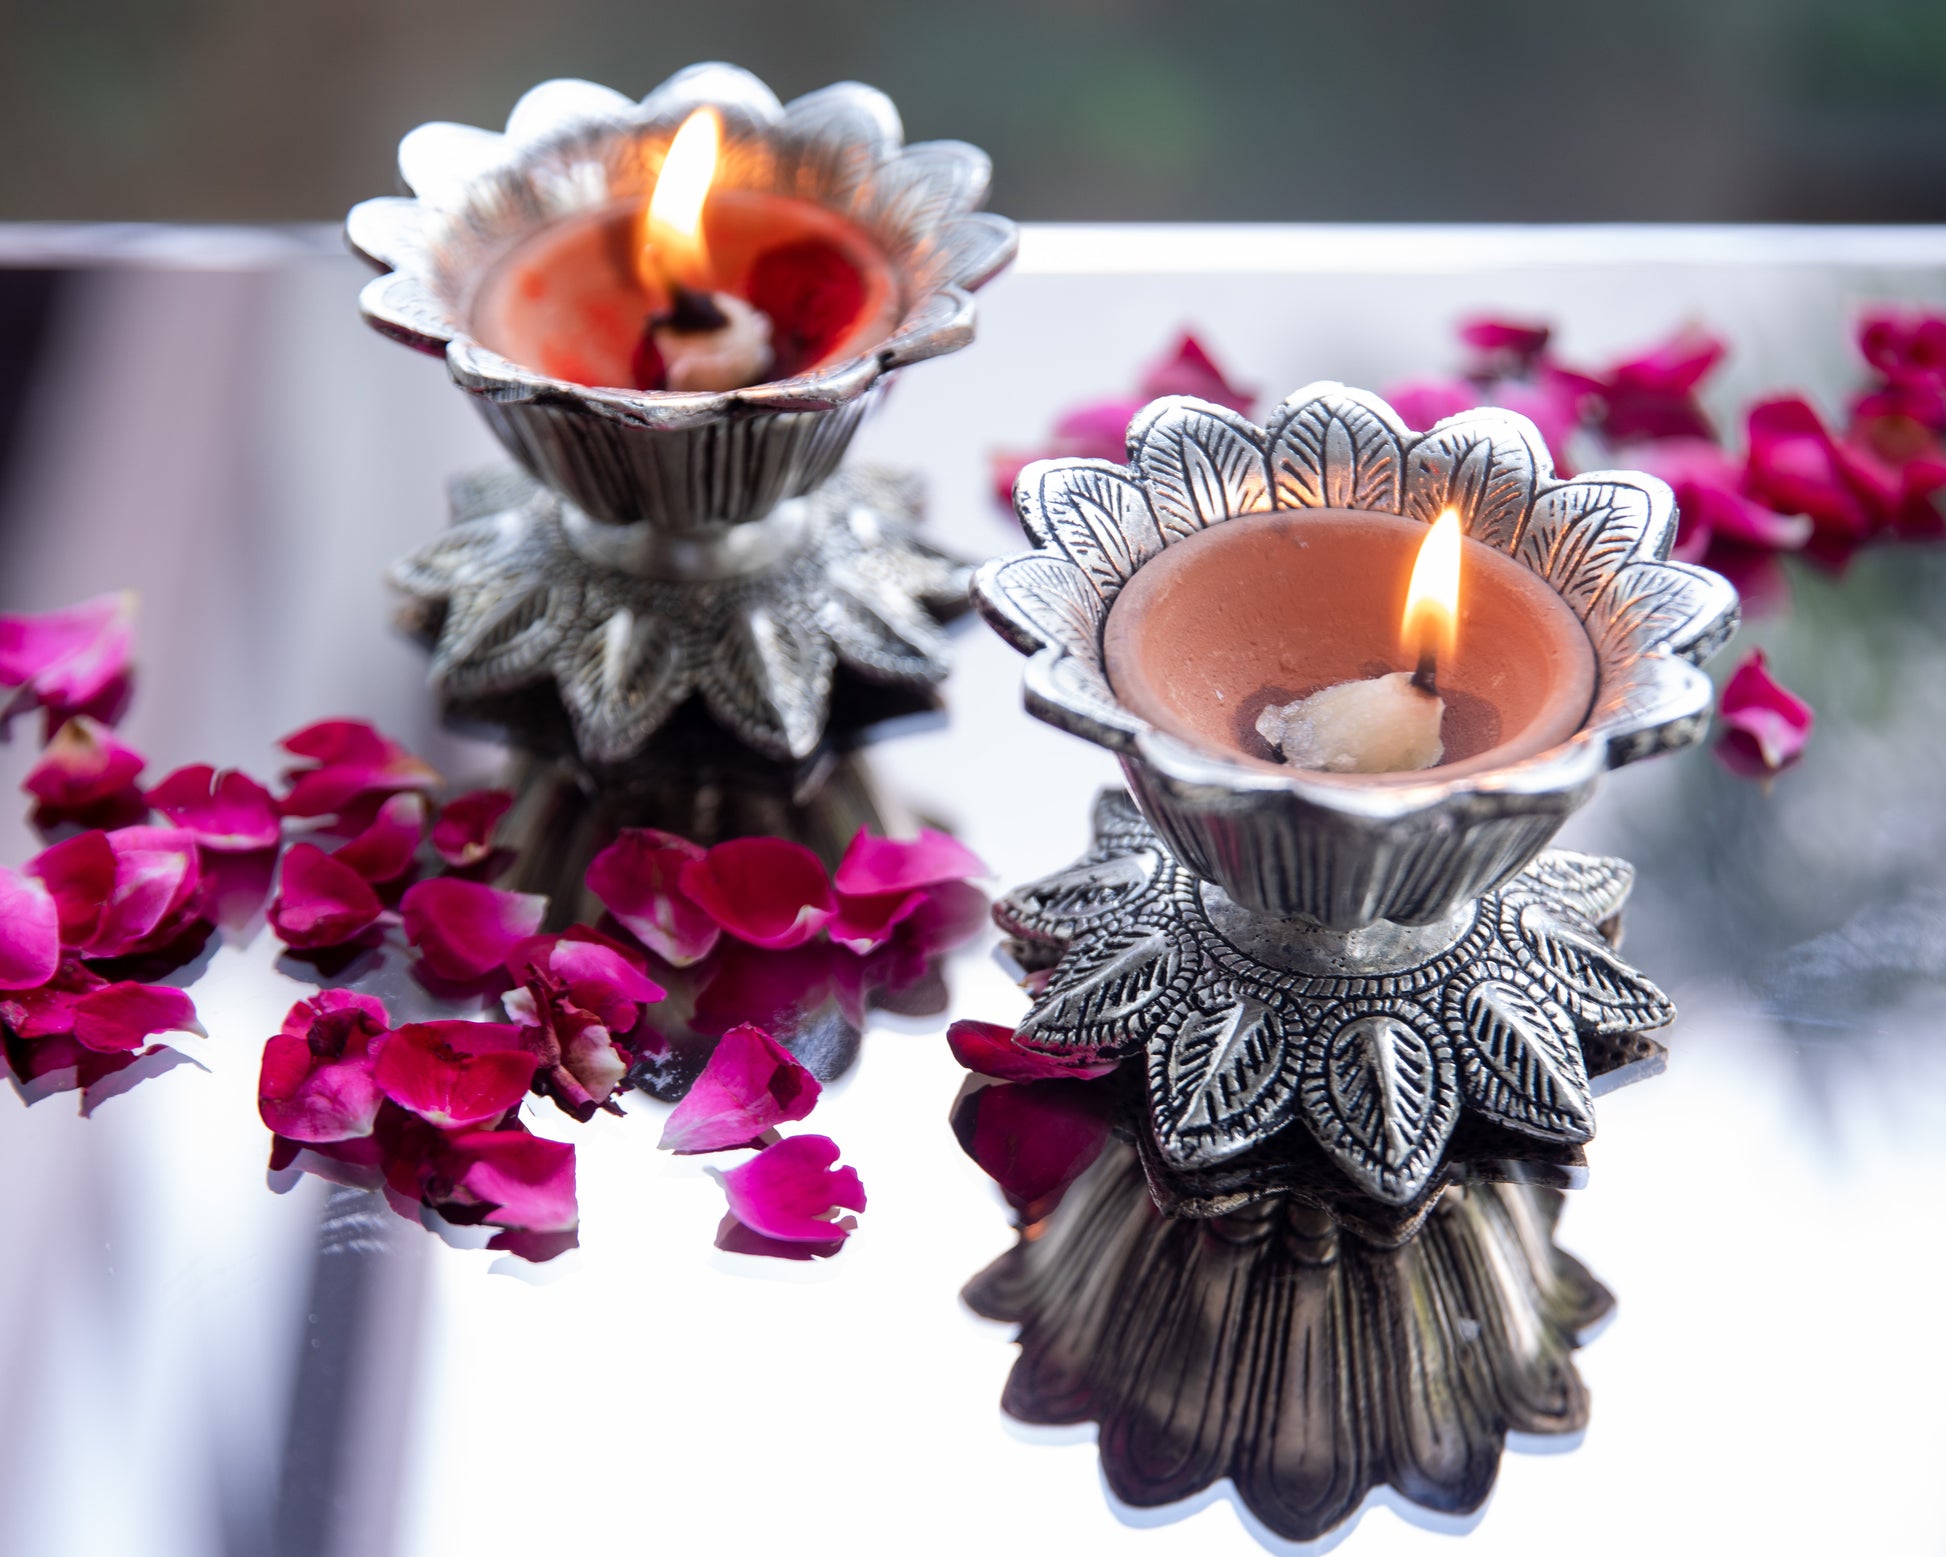 Leela's Lotus Diya is intricately designed diya and Its compact size makes it a versatile addition to your altar or meditation space.    